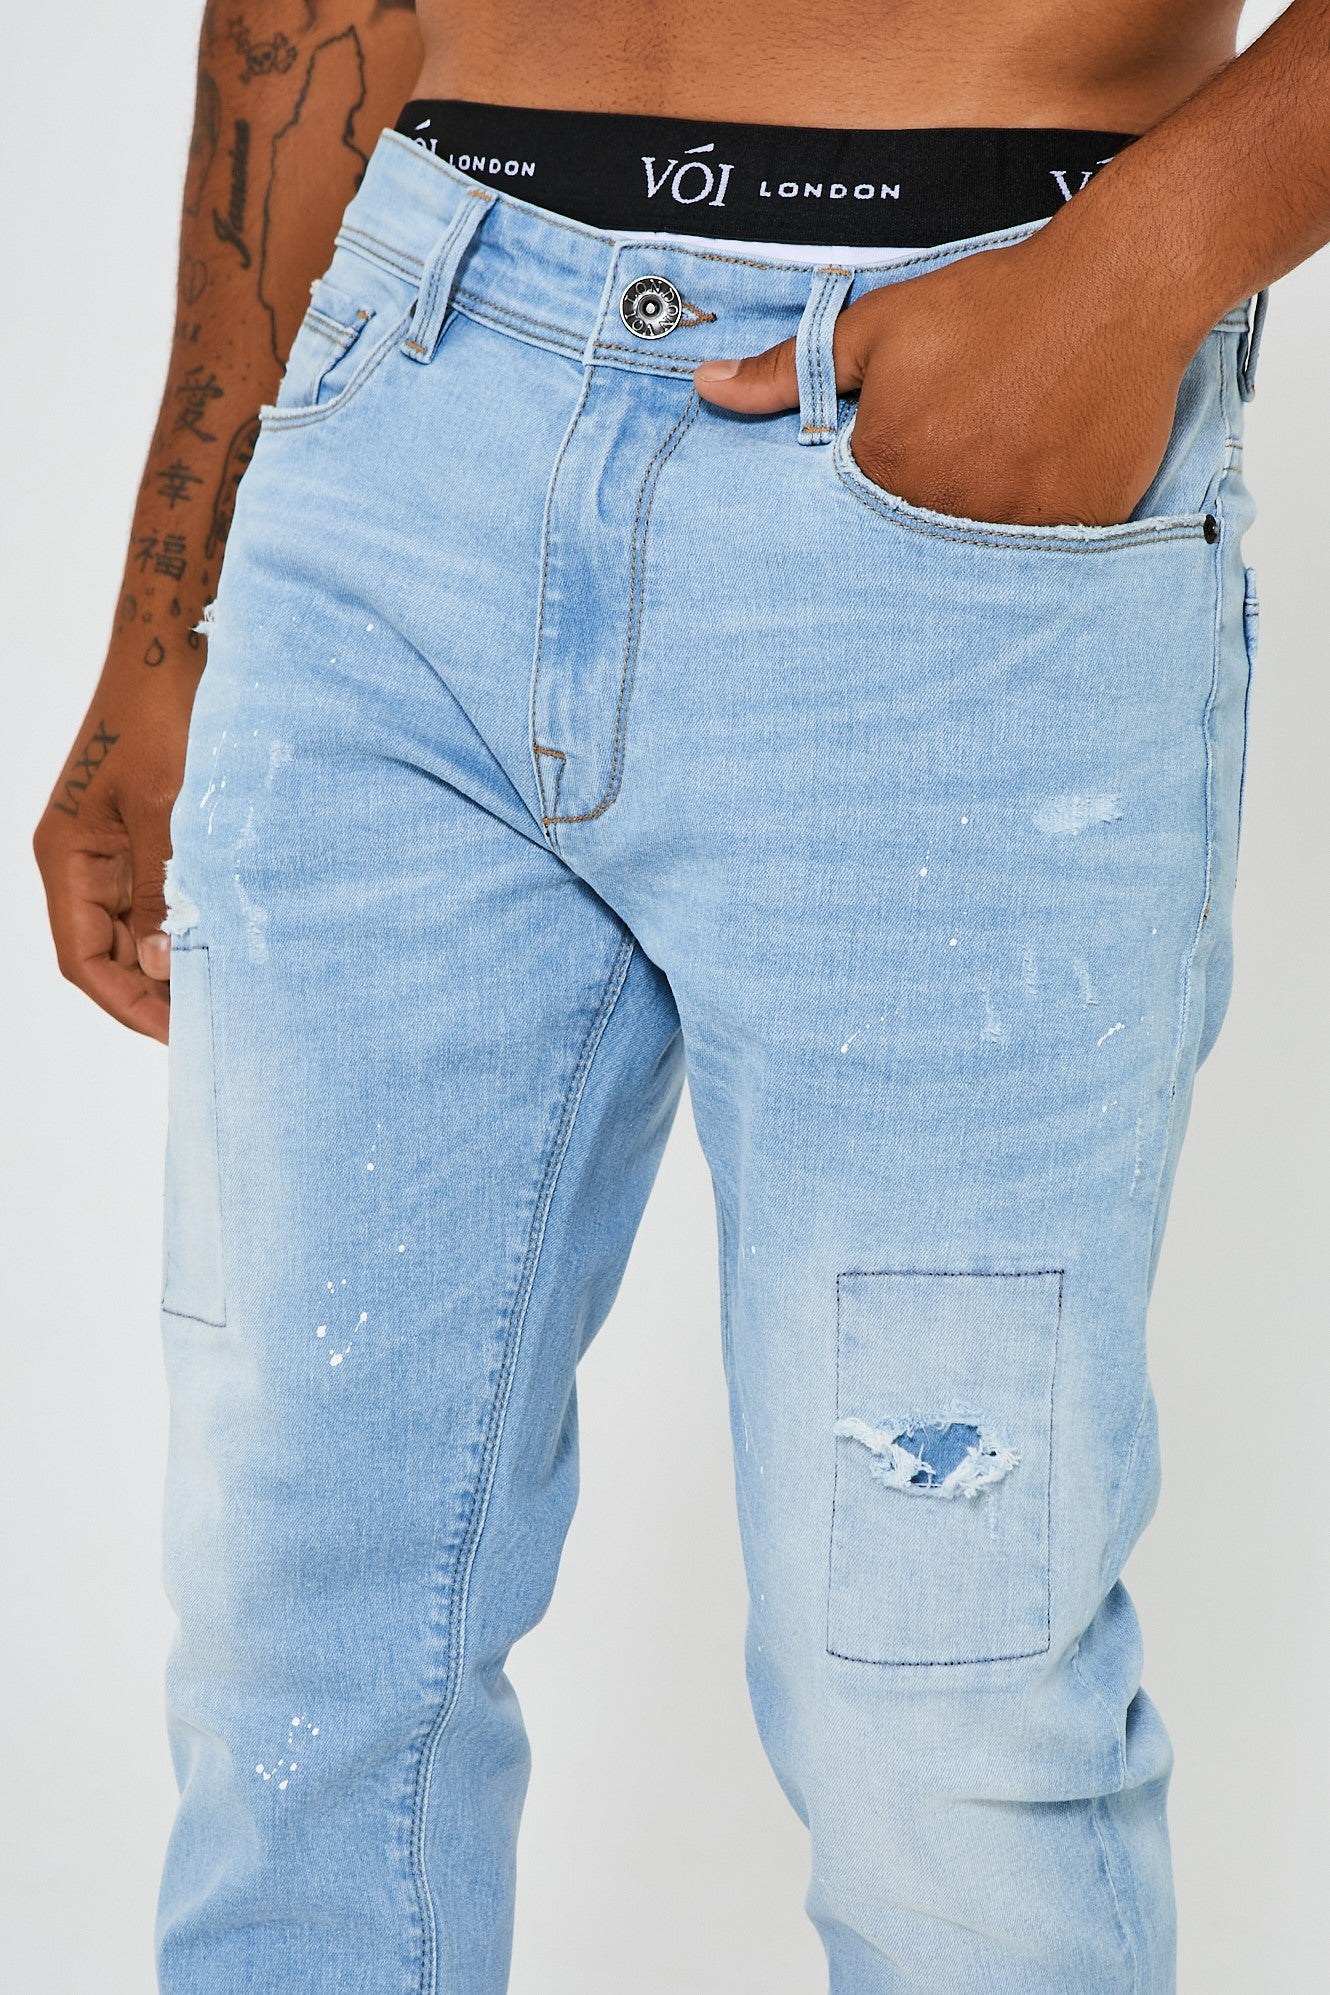 Bardsley Tapered Jean - Ice Blue